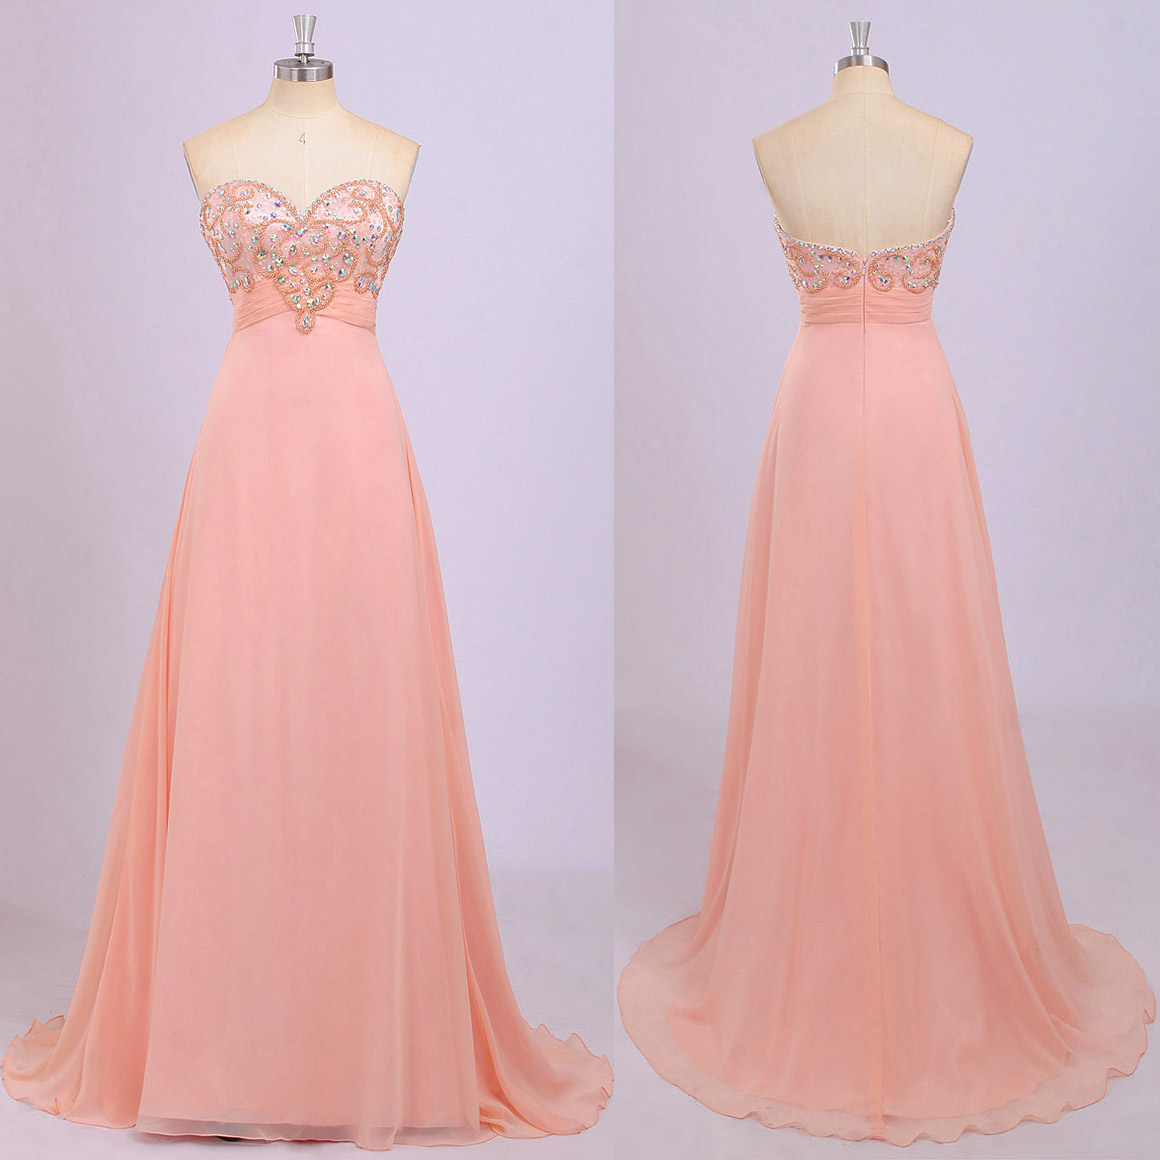 Different Blush Prom Dresses, Sweetheart Empire Prom Gowns, Beaded Chiffon Prom Dress With Ruching Detail